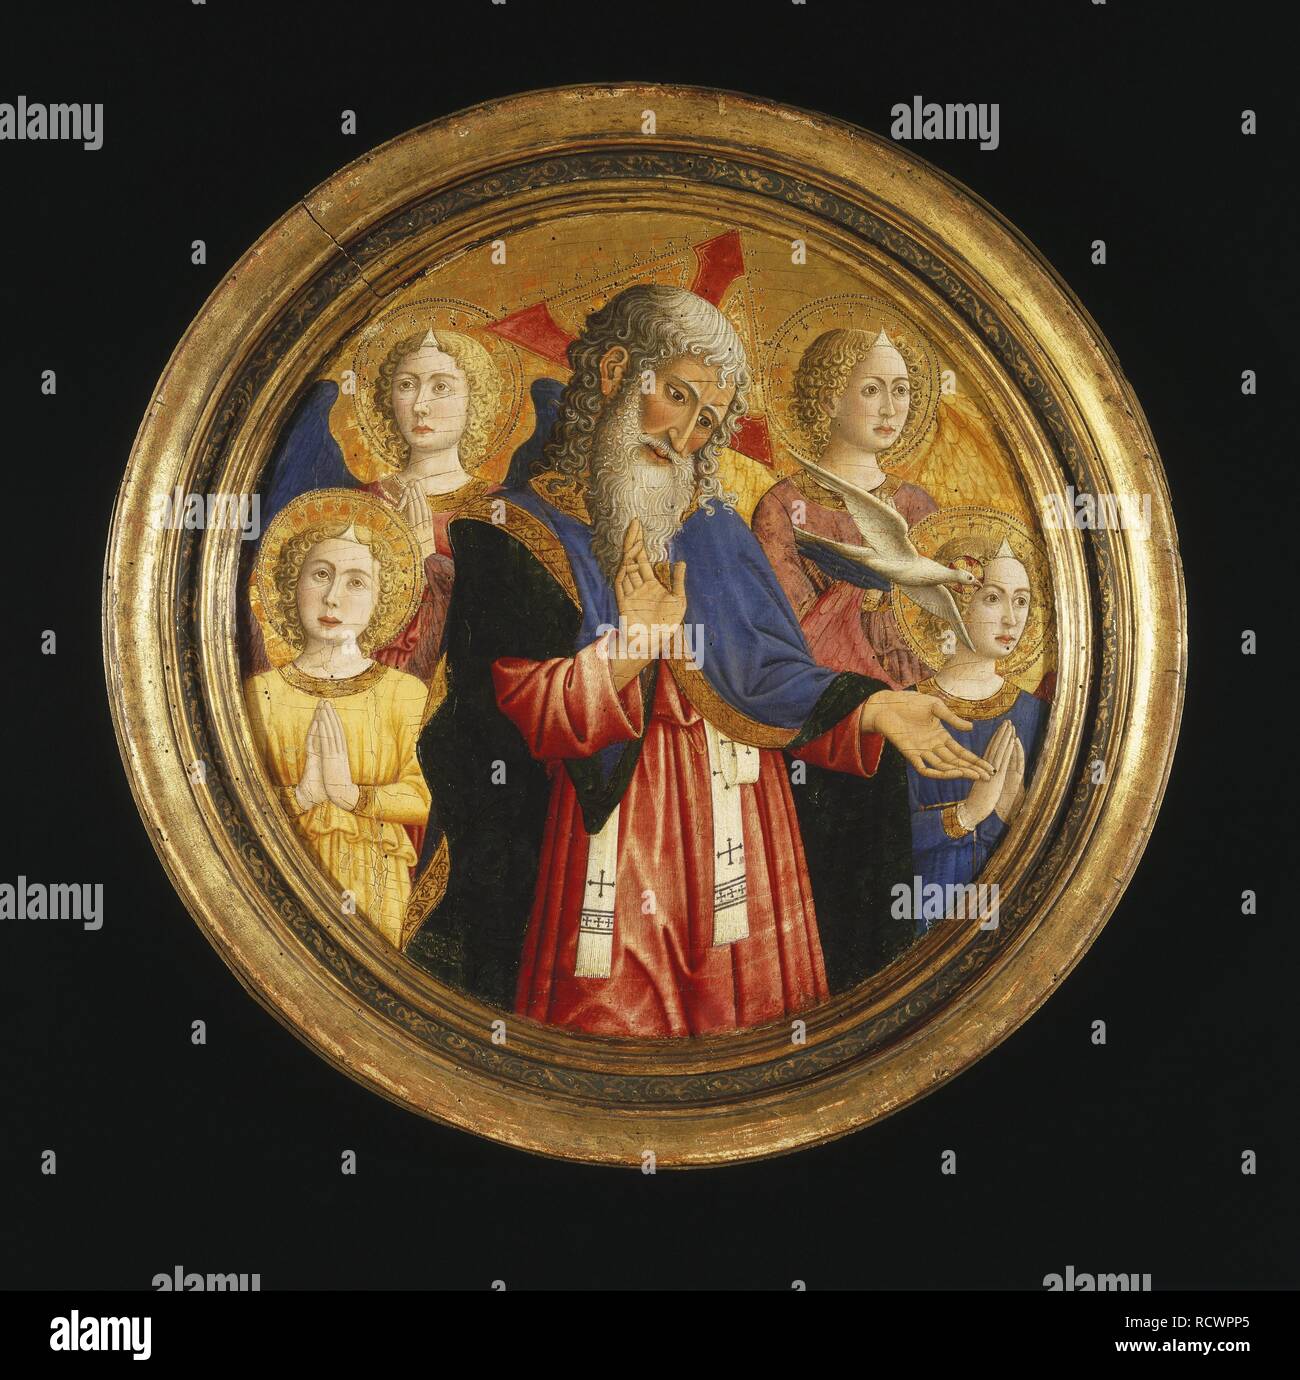 God the Father with Four Angels and the Dove of the Holy Spirit. Museum: Brooklyn Museum, New York. Author: Rimini, Giovanni Francesco da. Stock Photo